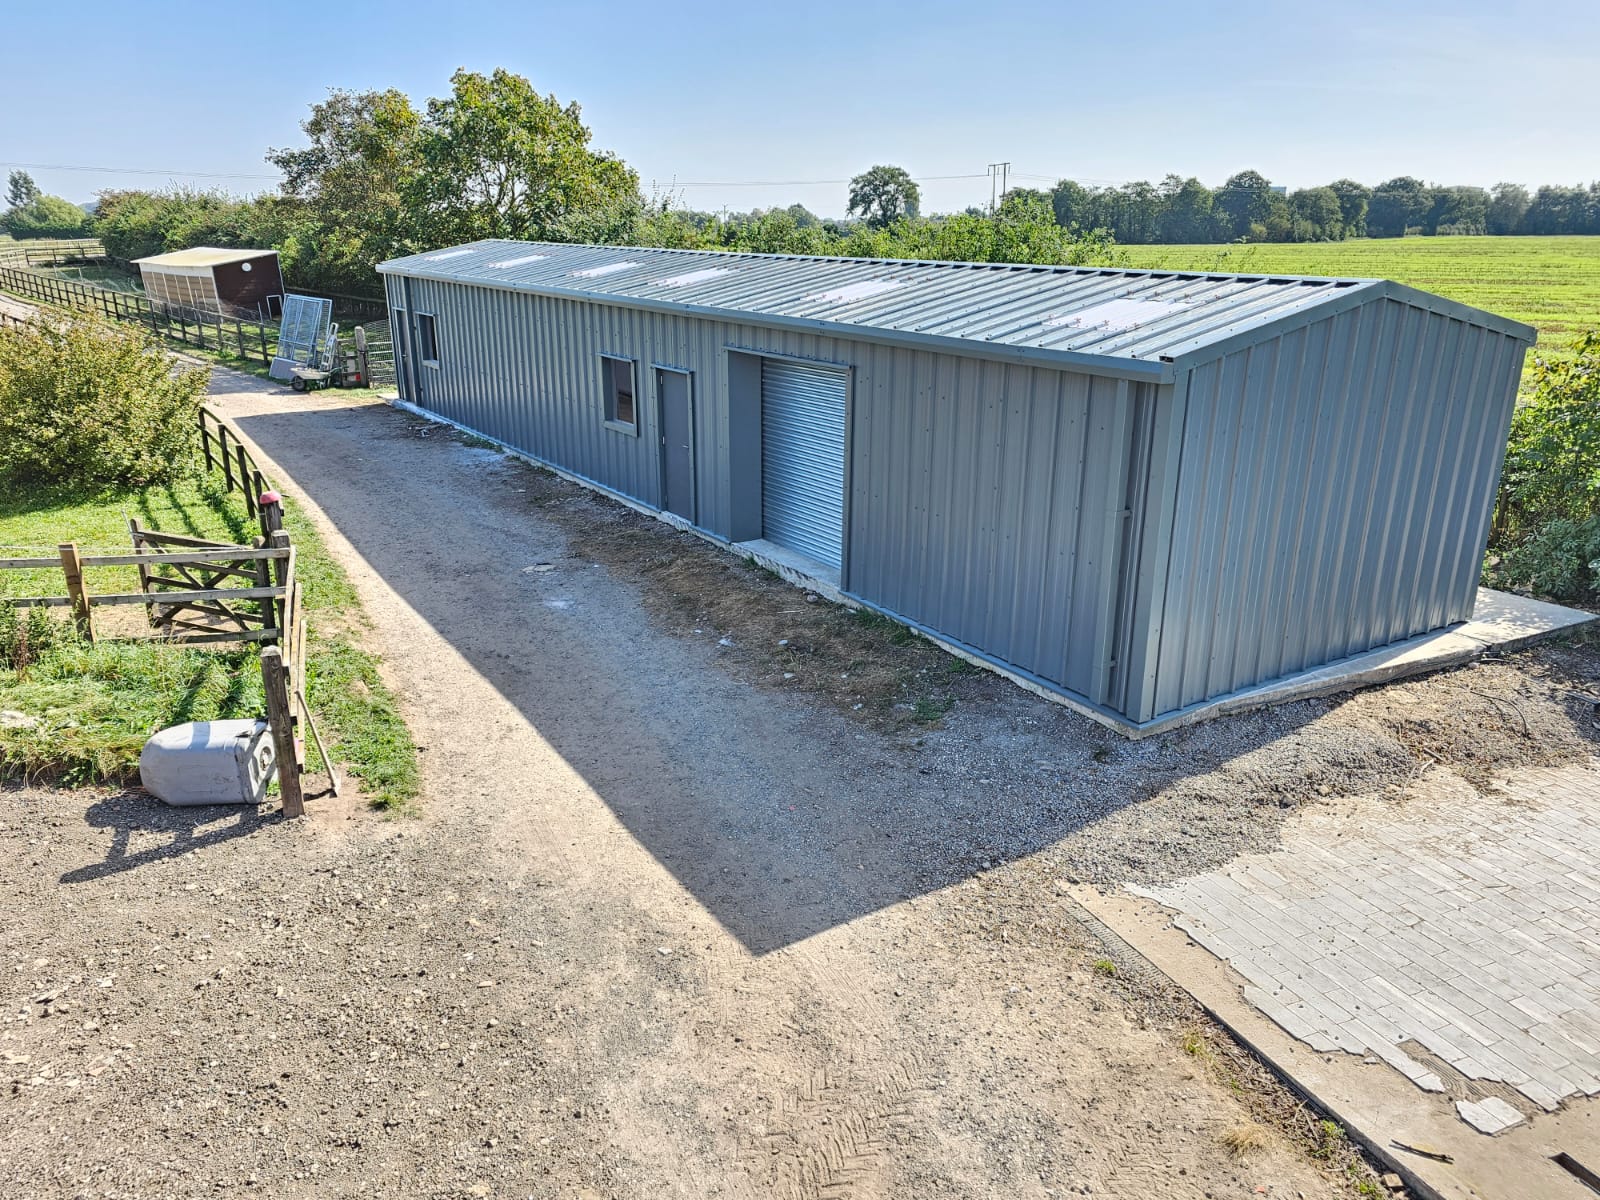 Specialists In Manufacturing Of Steel Buildings In Buckinghamshire